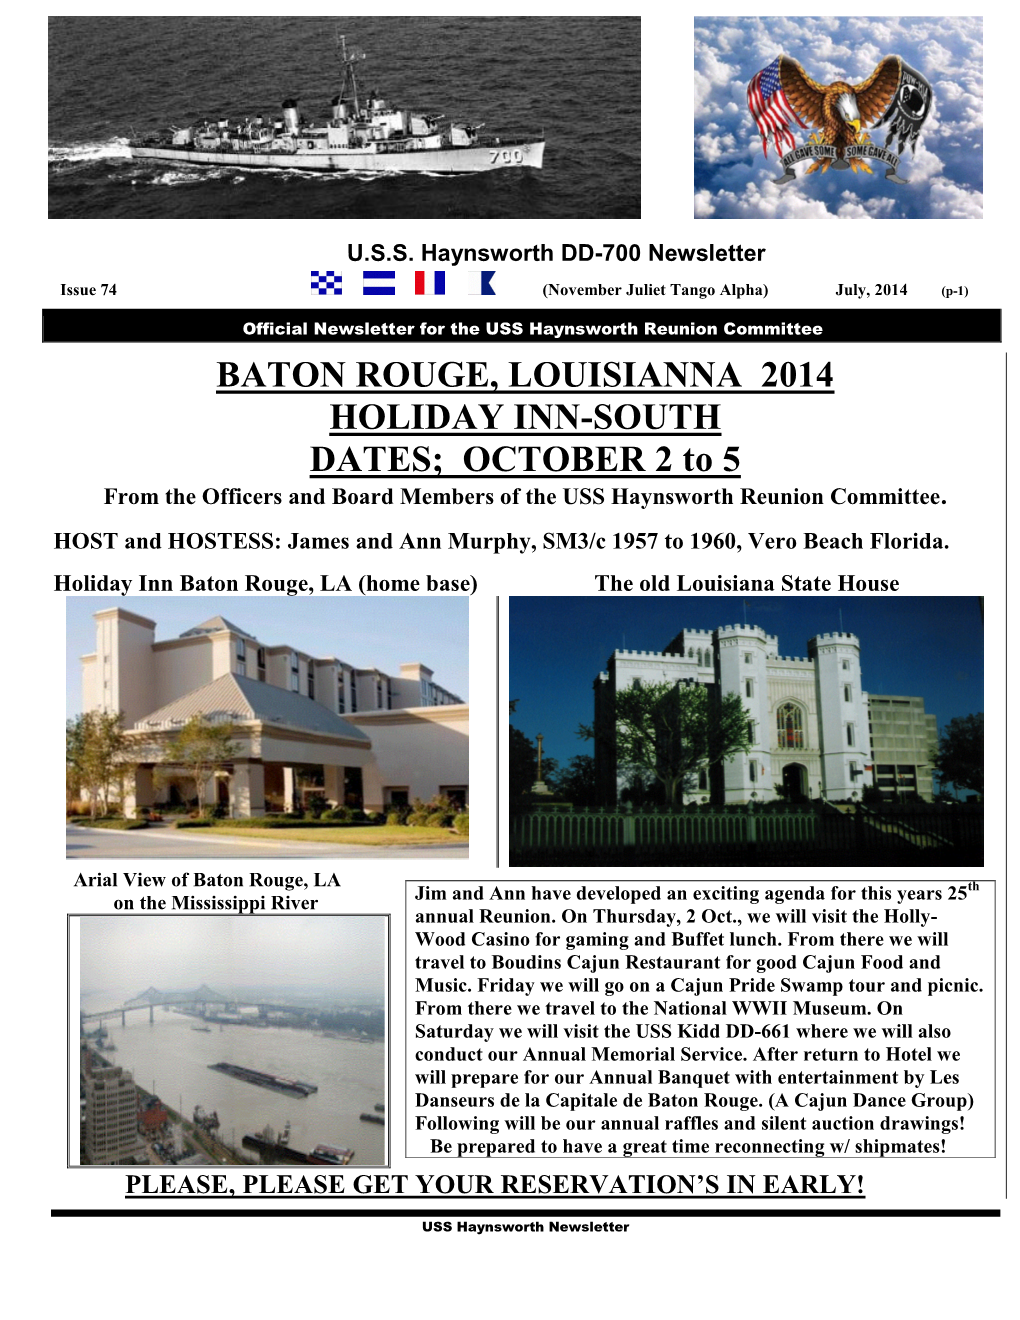 BATON ROUGE, LOUISIANNA 2014 HOLIDAY INN-SOUTH DATES; OCTOBER 2 to 5 from the Officers and Board Members of the USS Haynsworth Reunion Committee